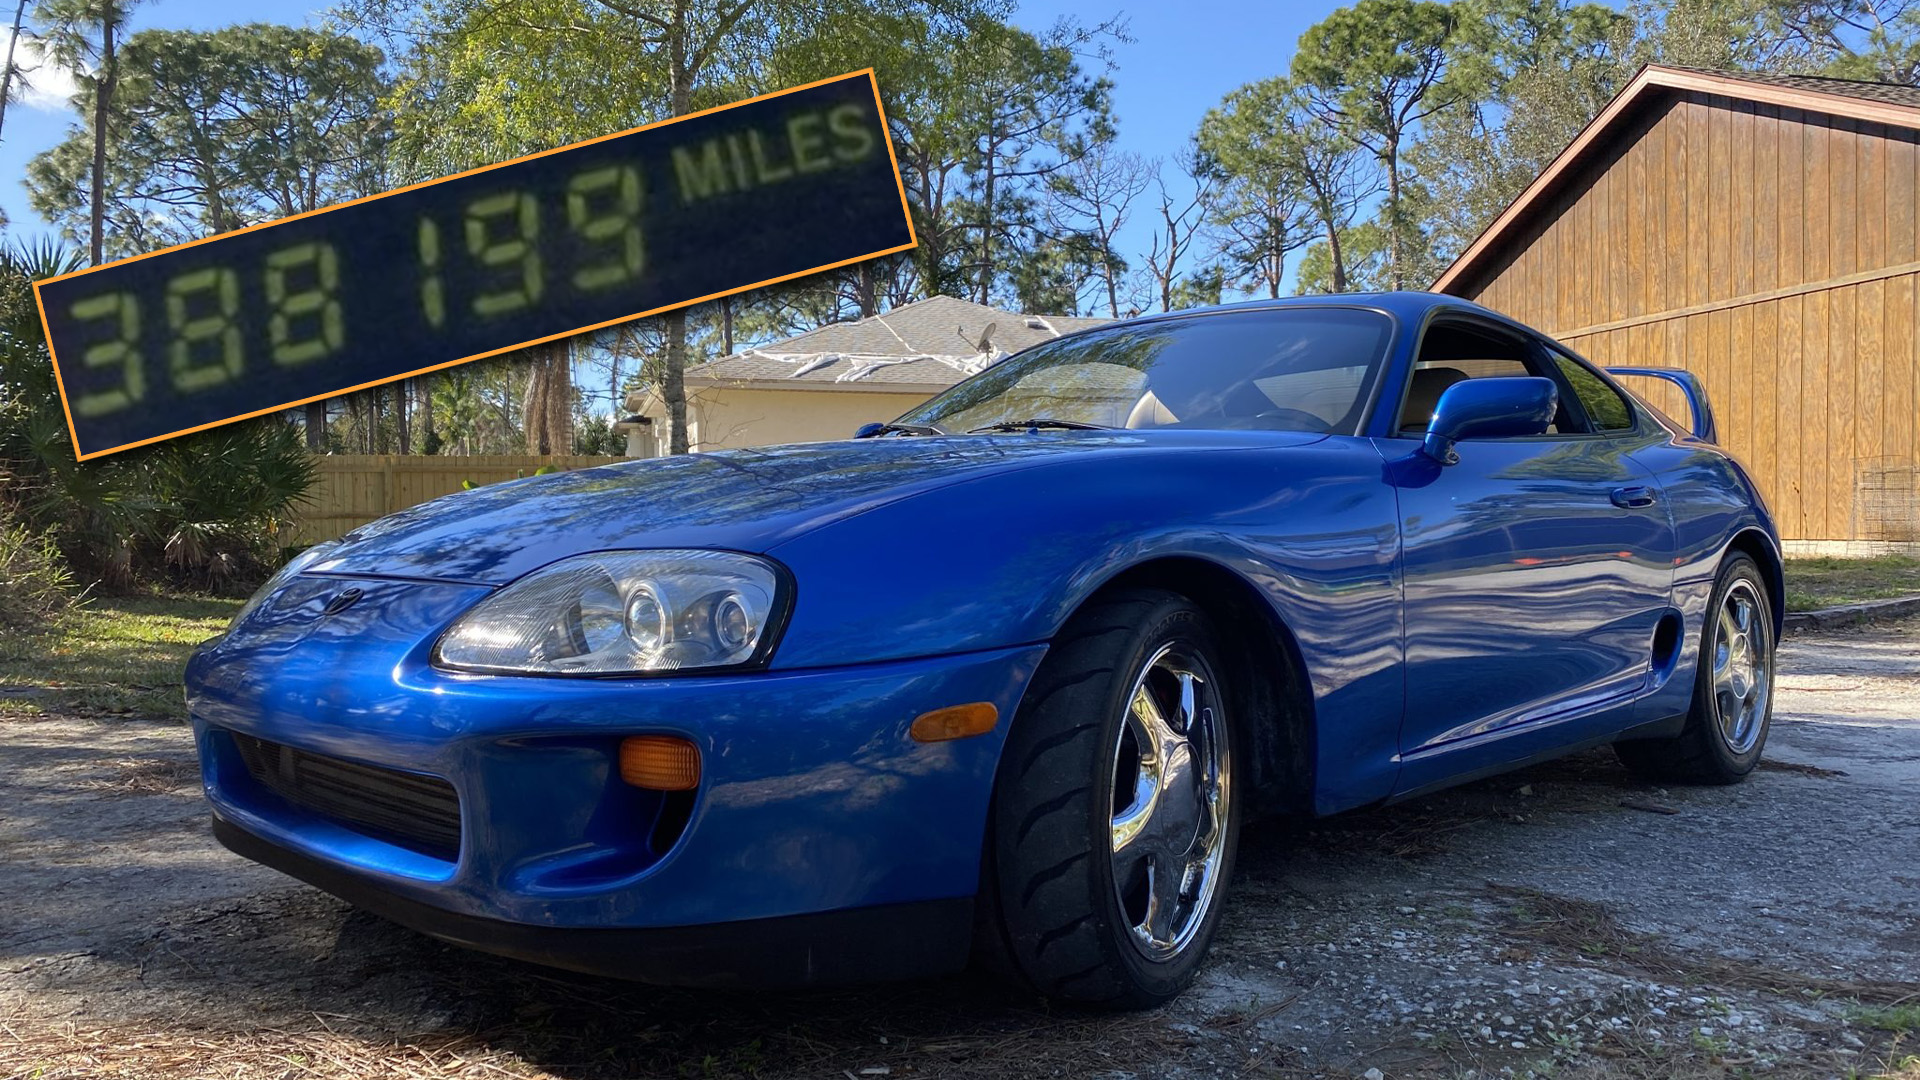 This 388,000-Mile Toyota Supra With Rust and Leaks Just Sold for $49,500